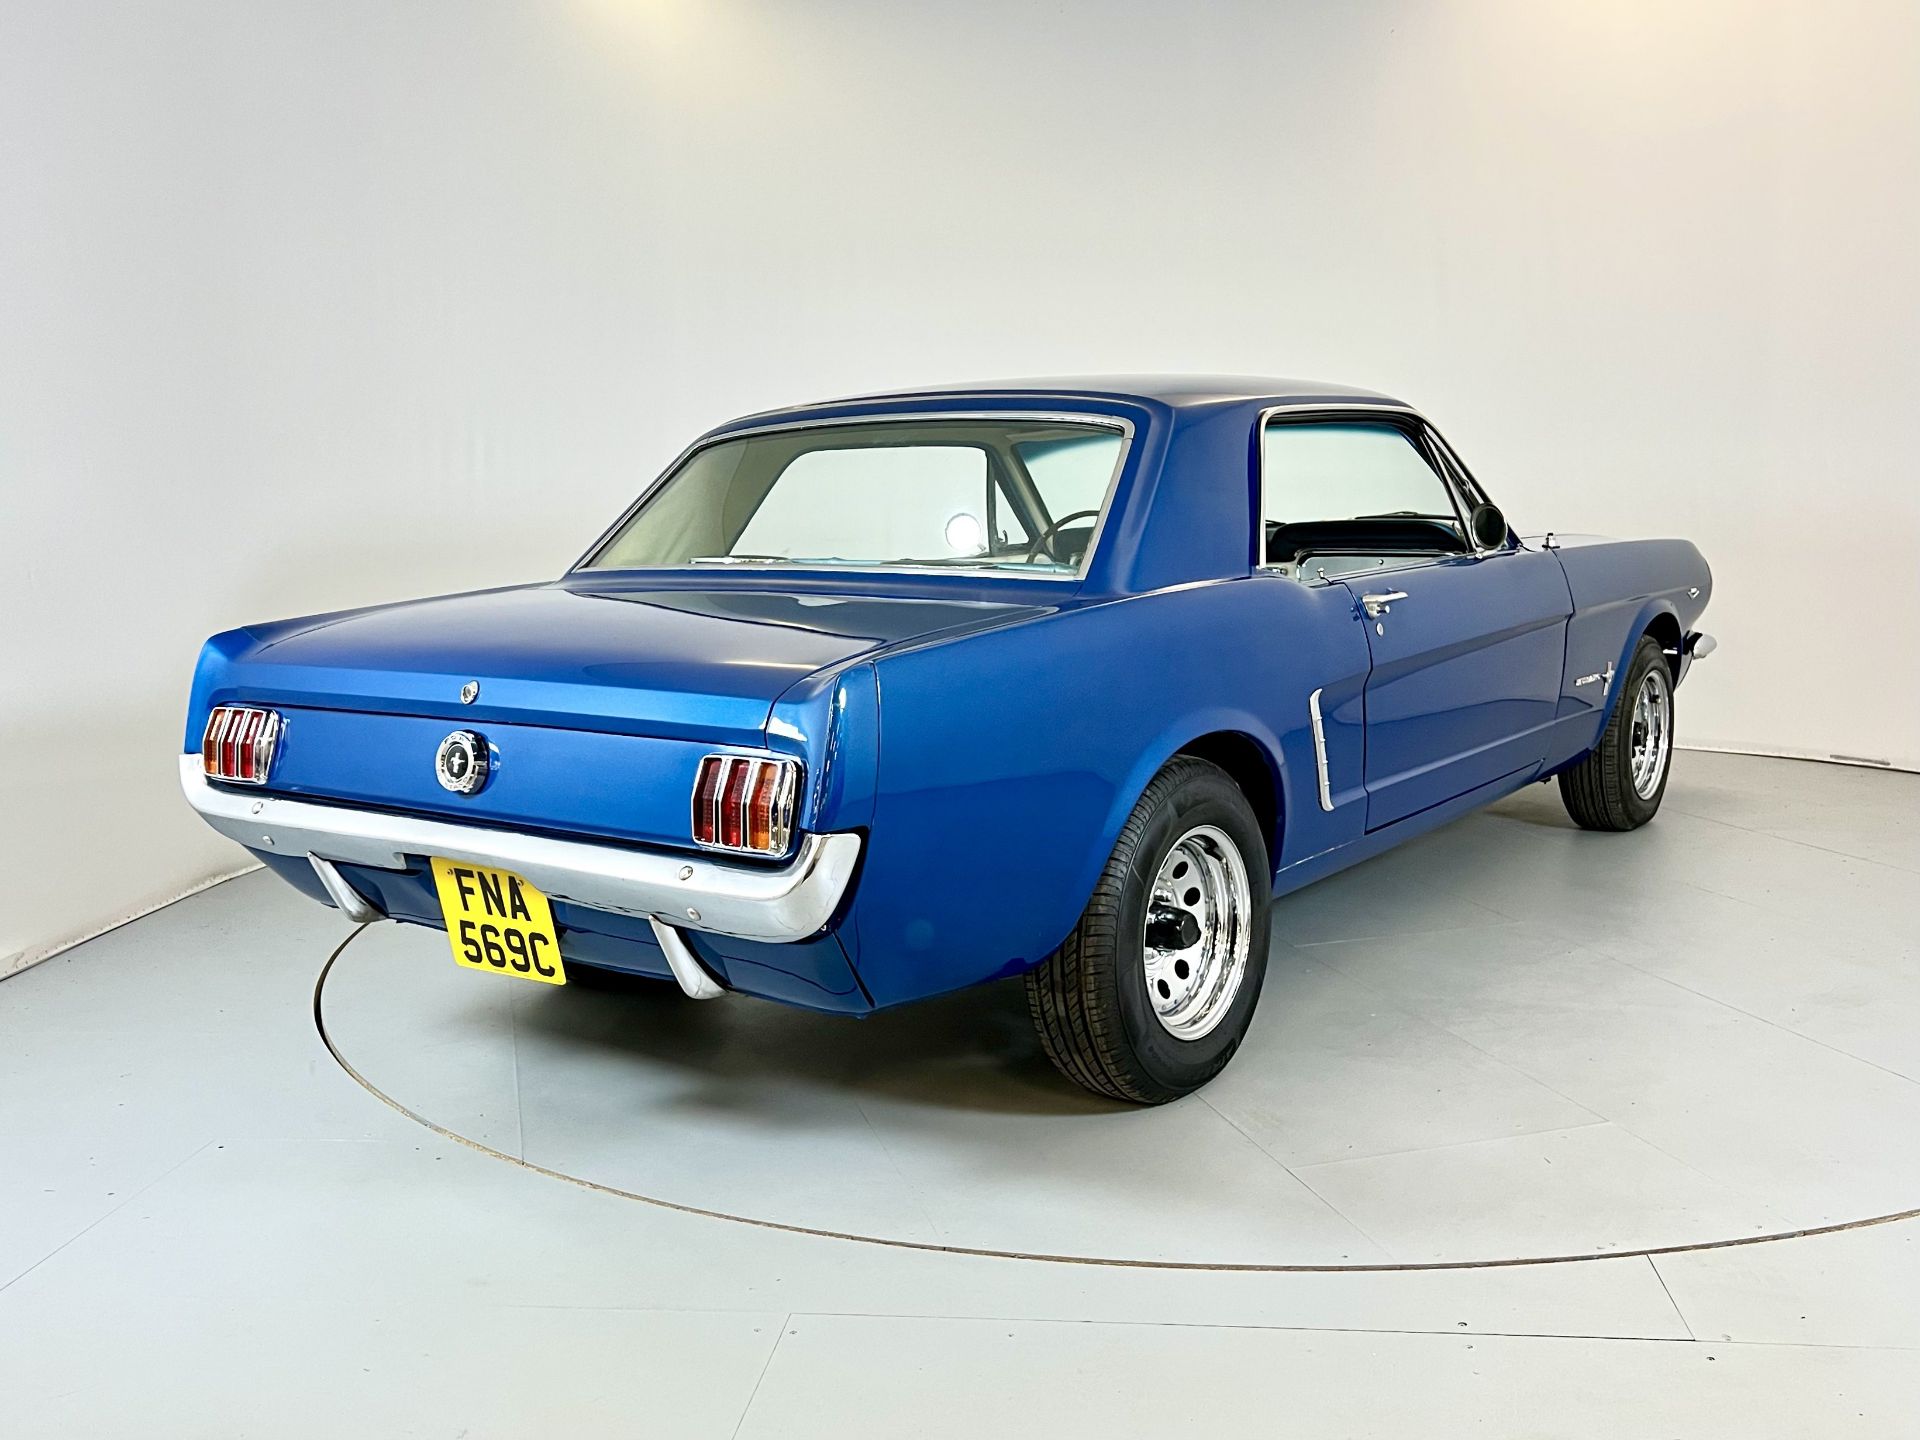 Ford Mustang 289 Coupe 'A Code' - Image 8 of 29